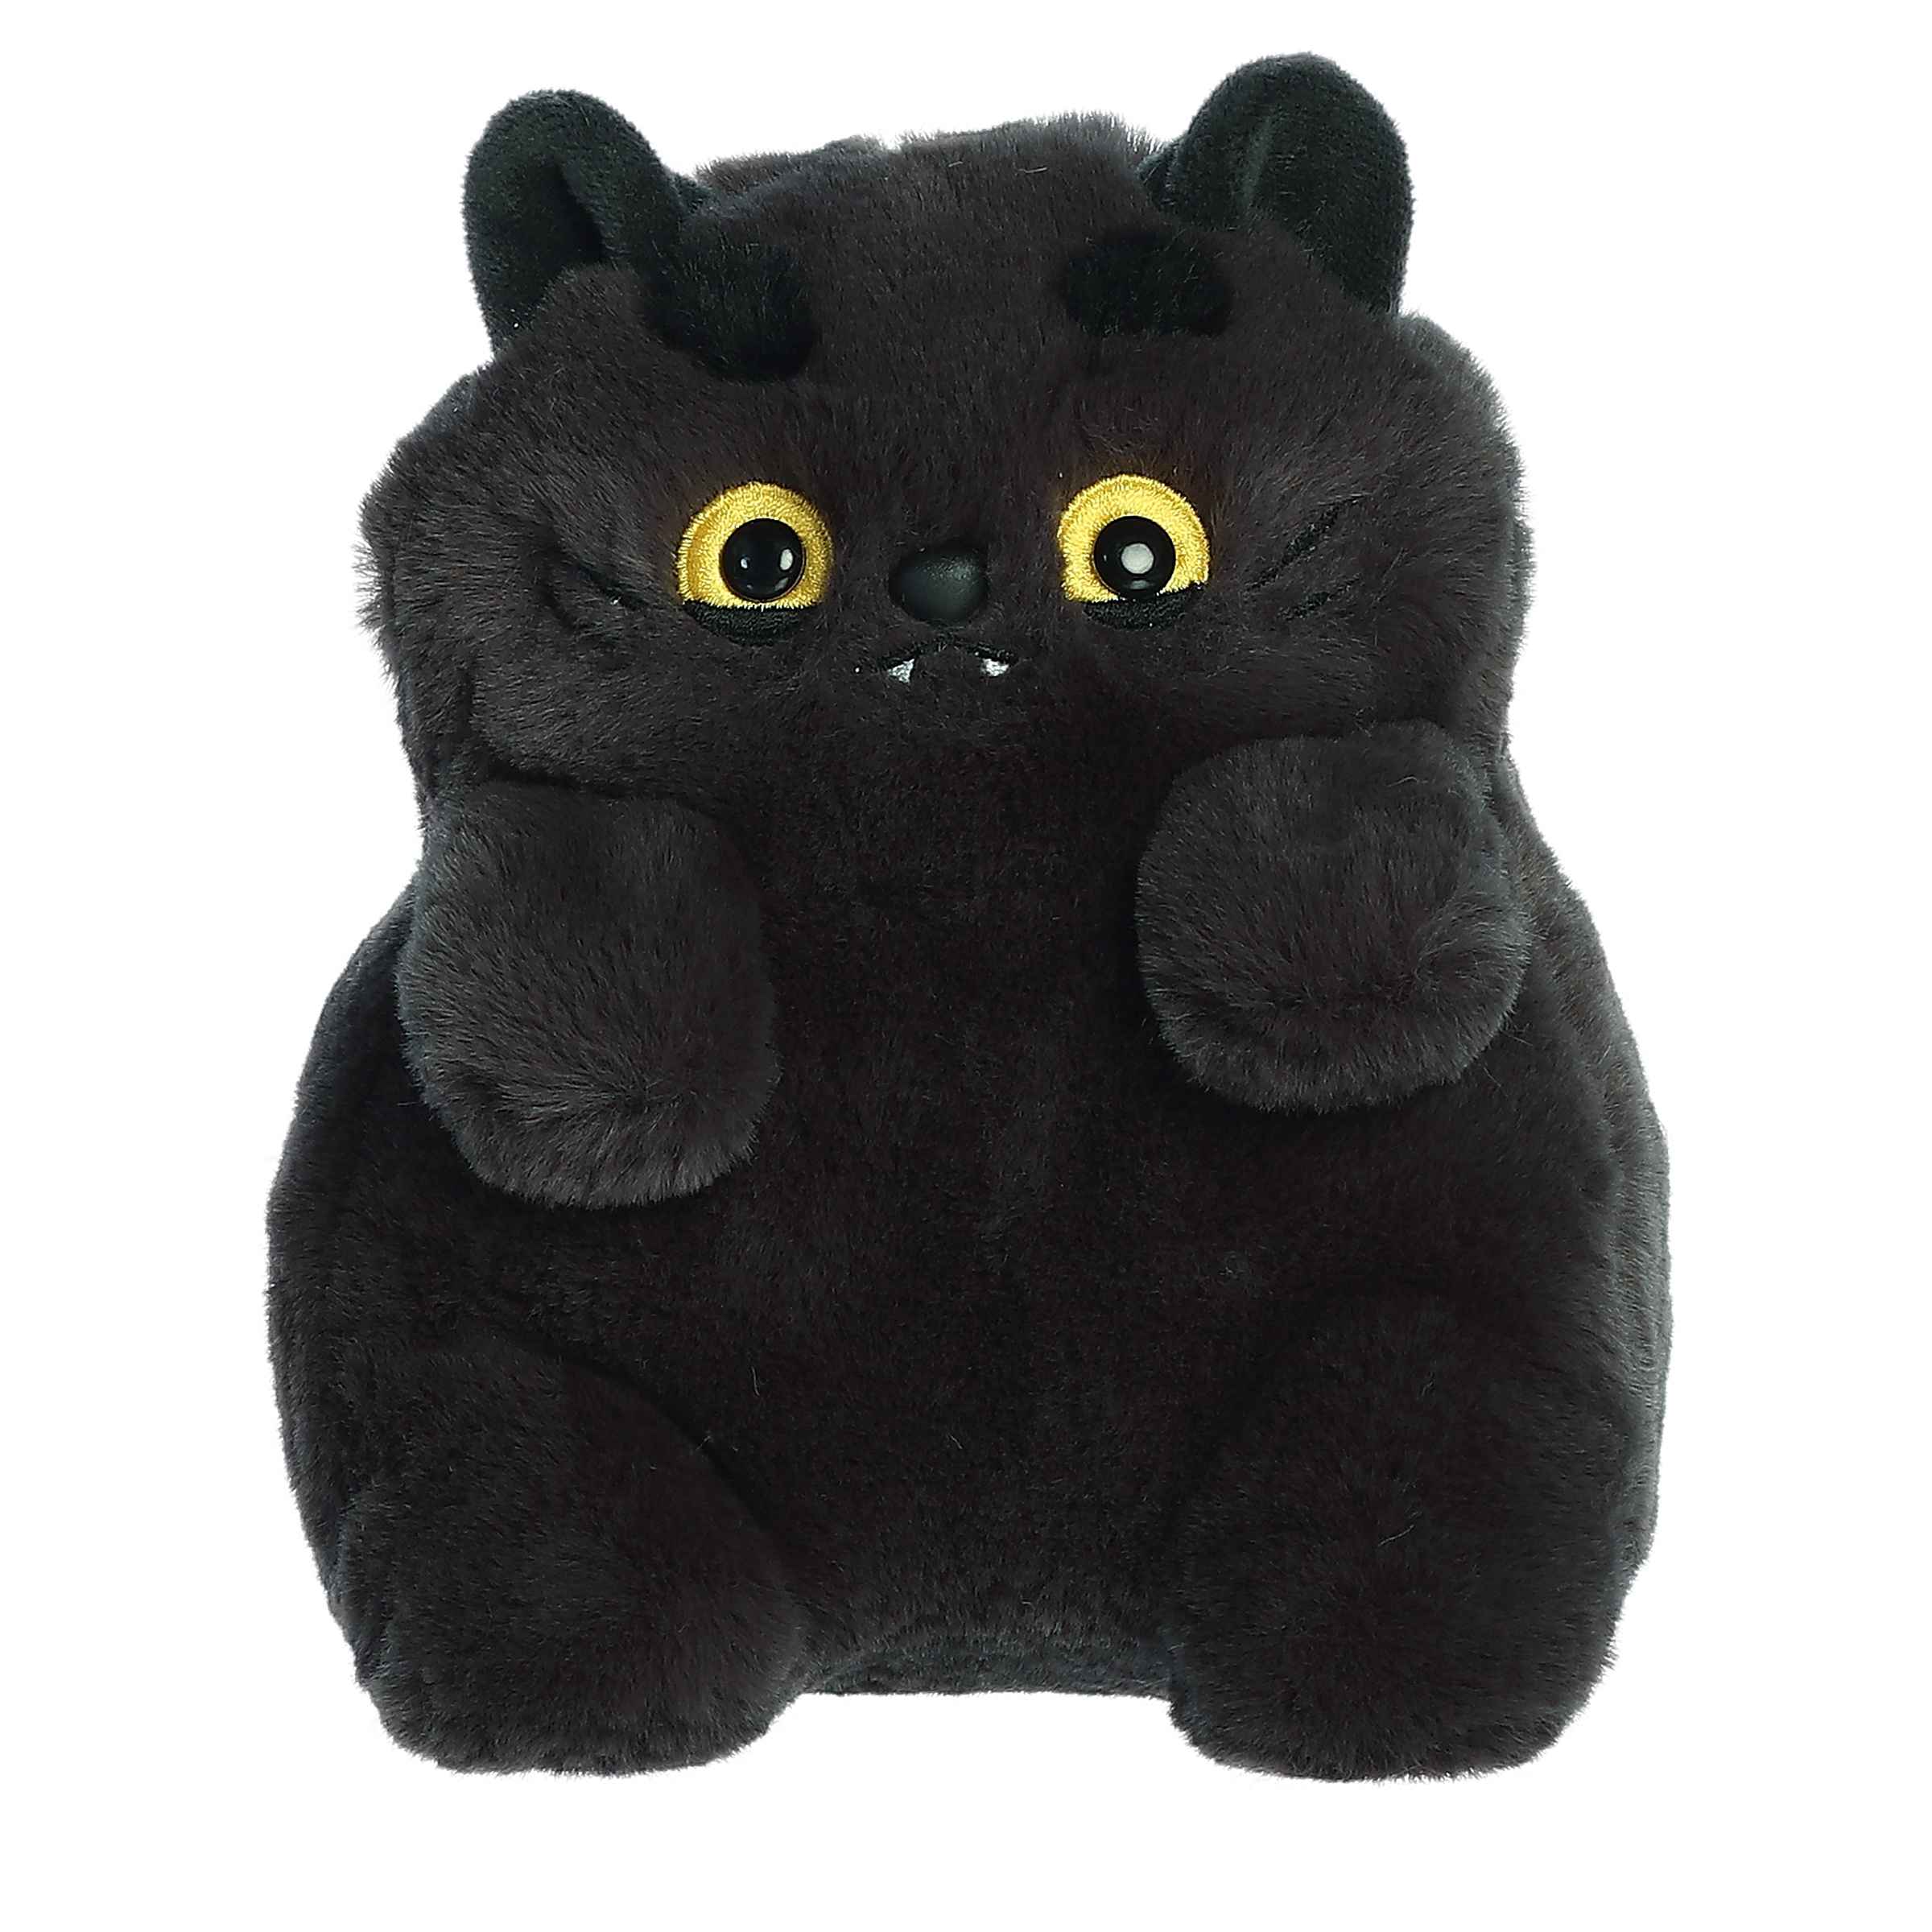 Storm plush MewMews, soft black fur, captivating yellow eyes, contemplative expression, with personality booklet and sticker